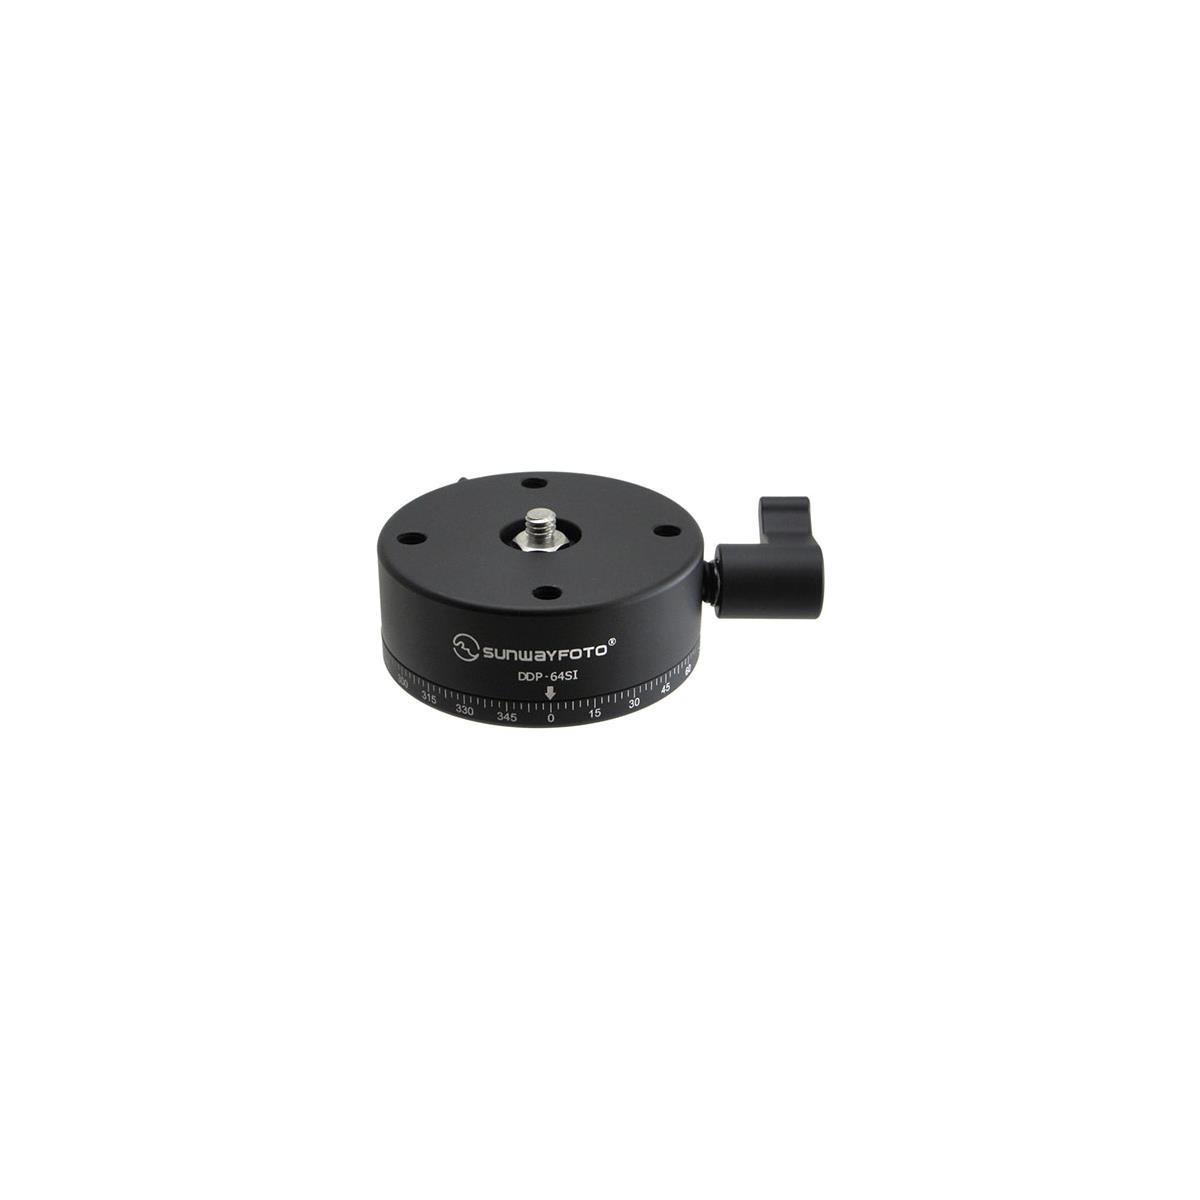 Image of SunwayFoto DDP-64SI Indexing Rotator for 360x180deg. Spherical and HDR Panoramas